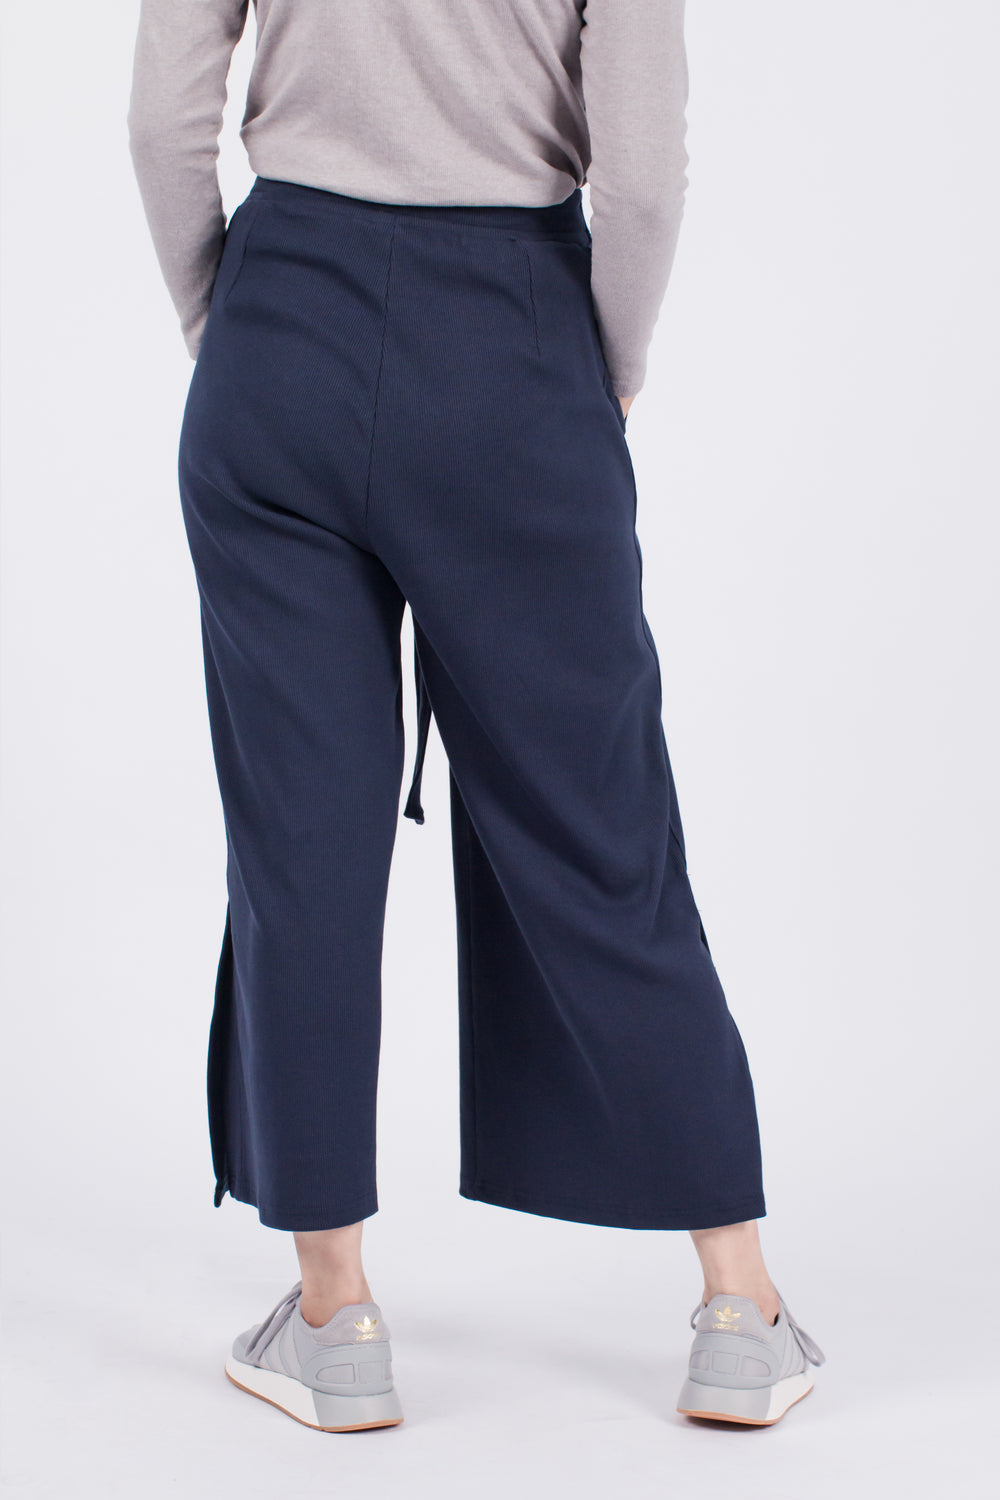 Muzca Sybil Side Slith Pants In Navy Modest Loose Fitting Women Trousers in Navy with Belt Sash, Pockets, Slit in 100% Cotton 